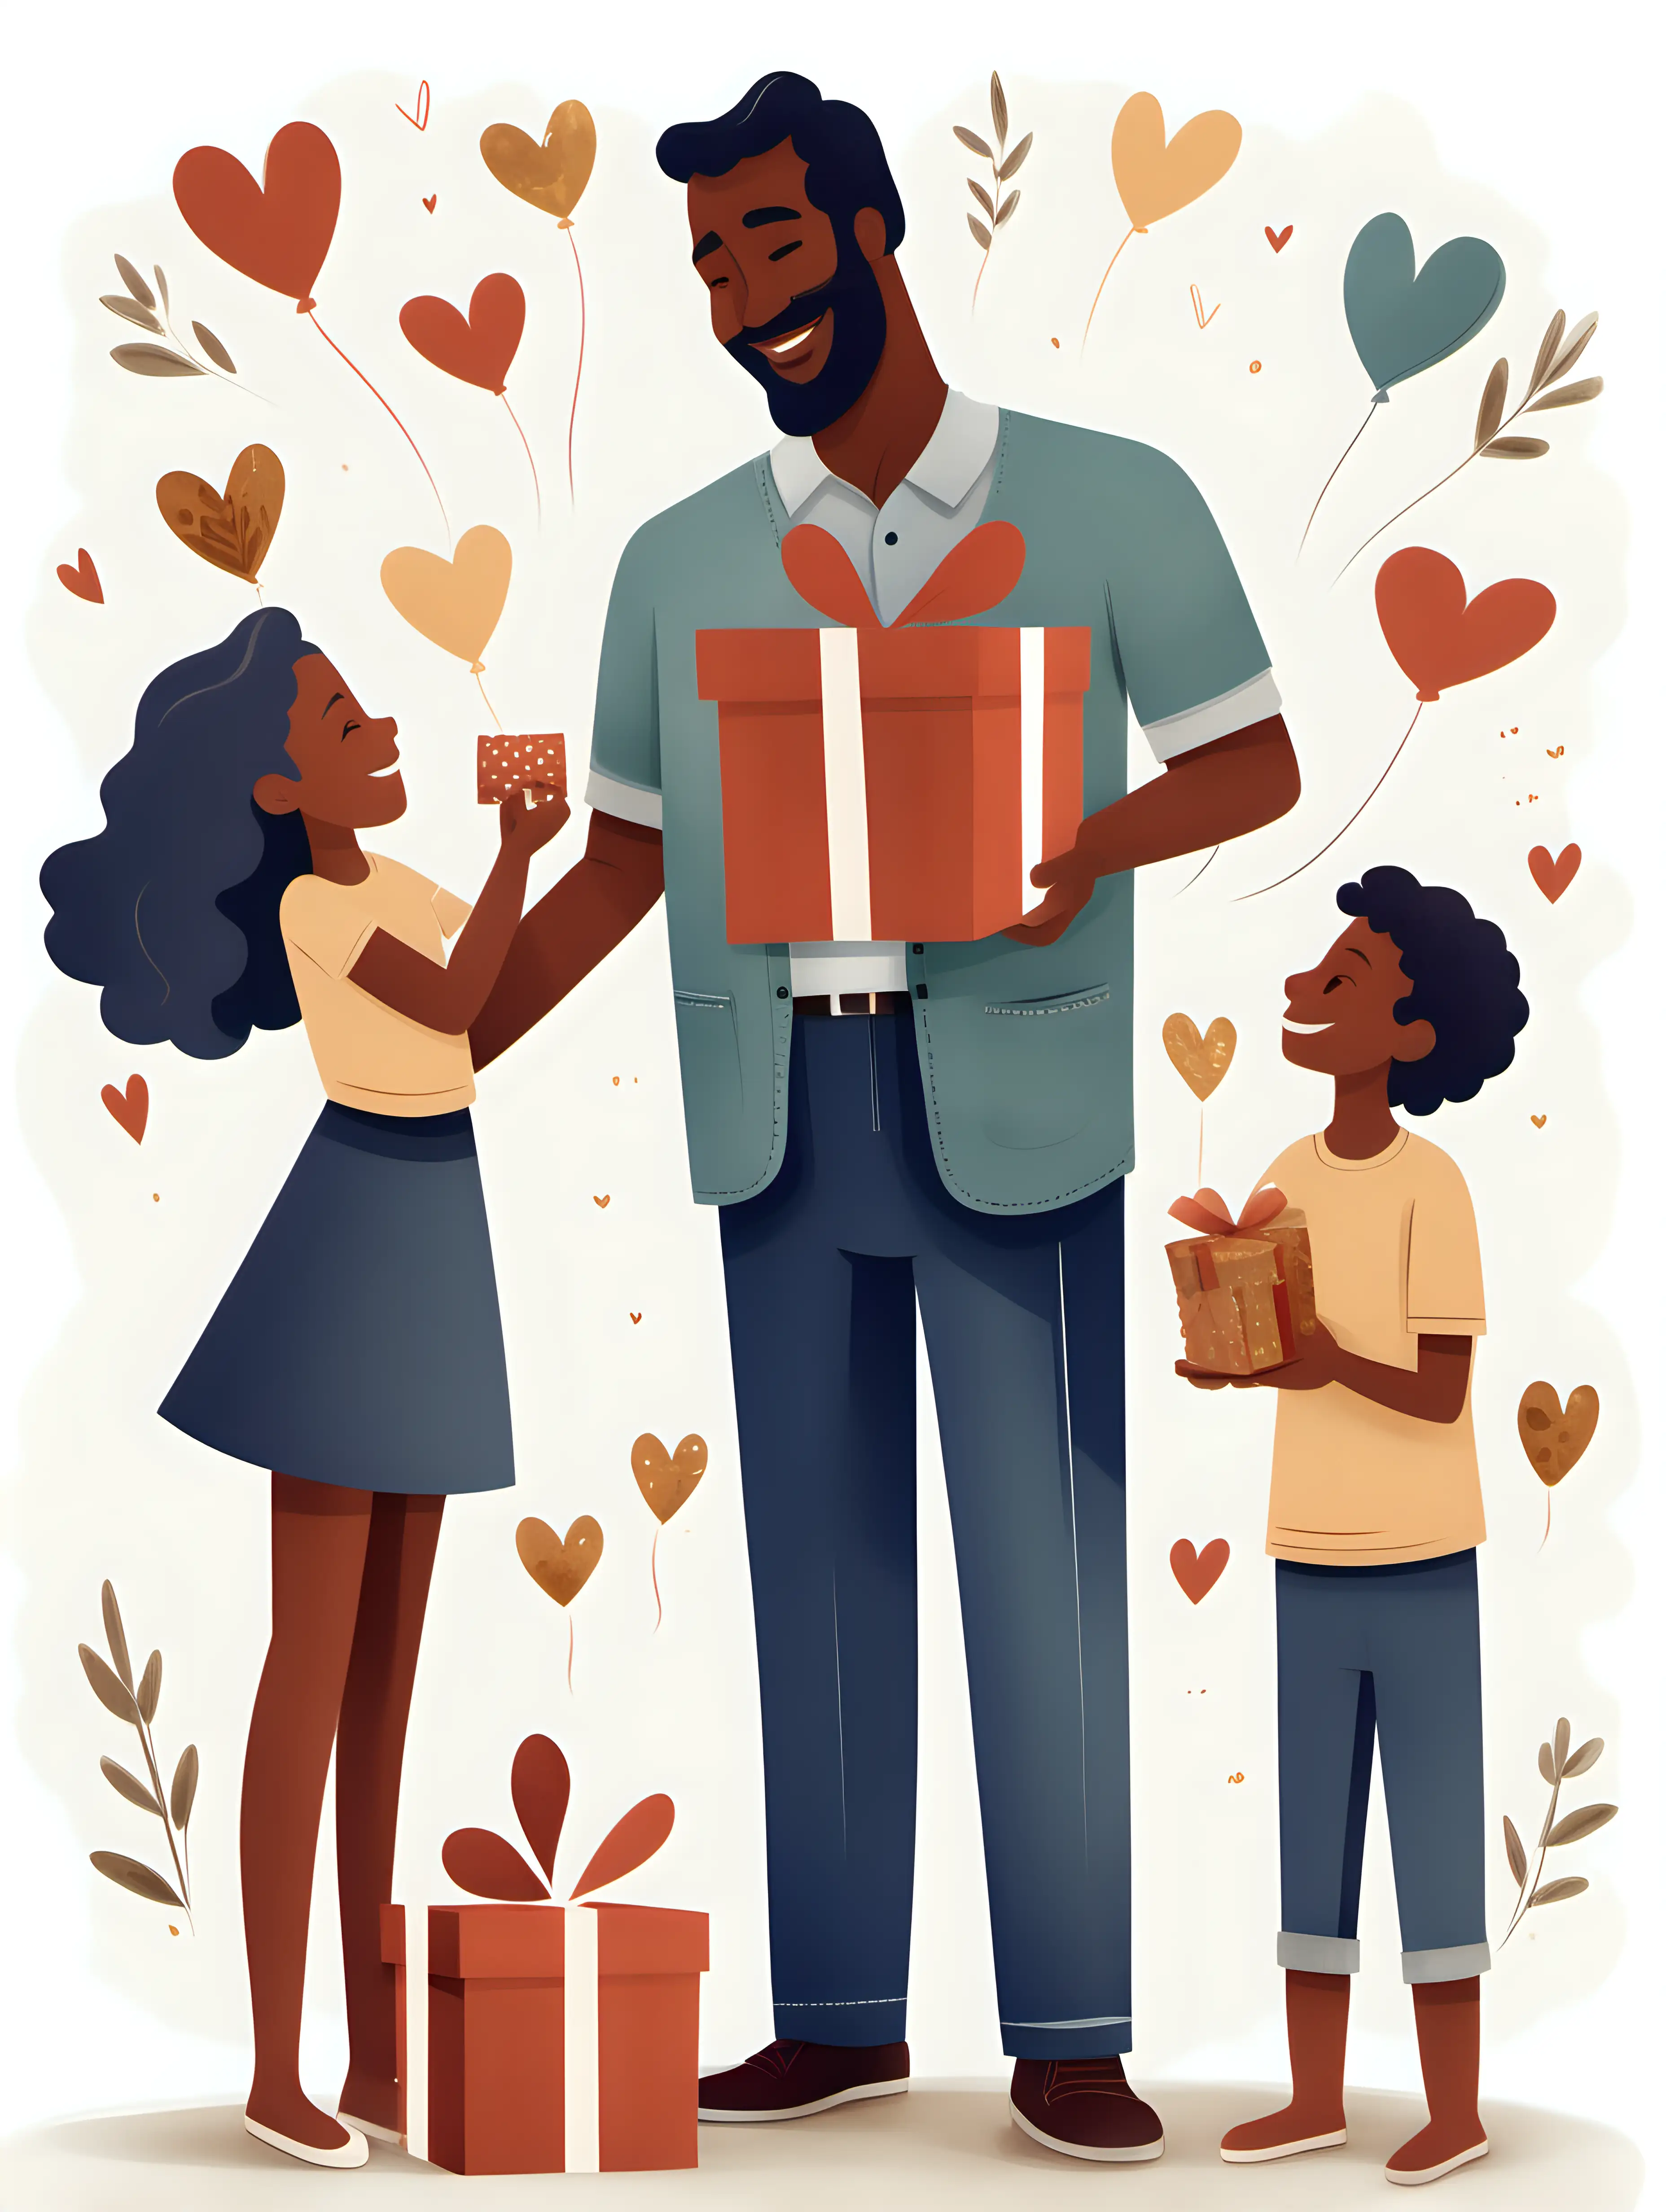 An artistic depiction of a father figure receiving gifts and tokens of appreciation from his children, such as handmade cards, artwork, and thoughtful gestures, highlighting the love and gratitude expressed on Father's Day.